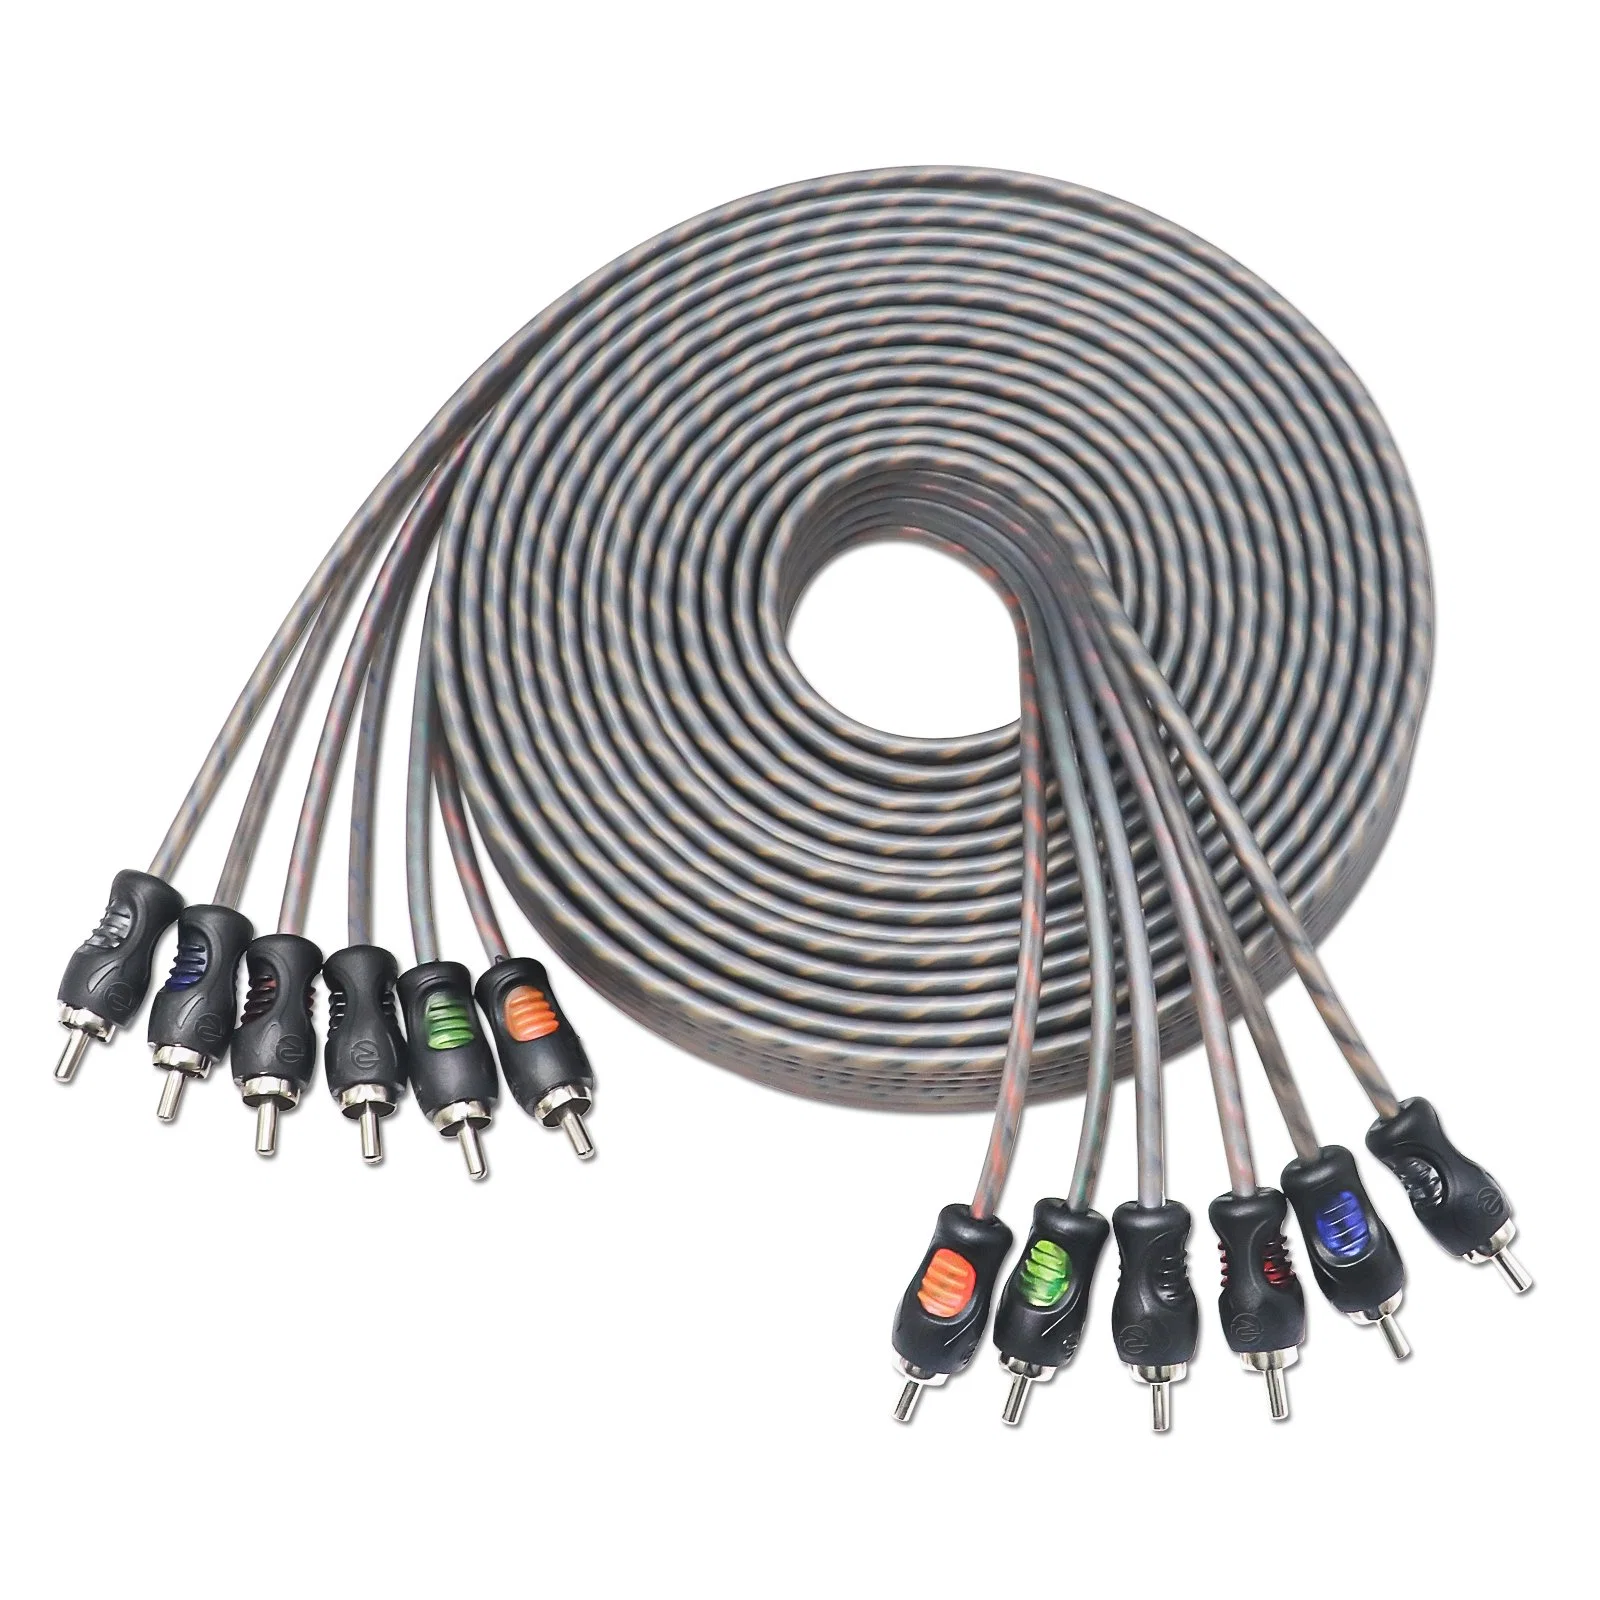 Edge Rci620 100% Oxygen Free Copper 20FT 6-Channel RCA Audio Cable, Twisted Pair with Noise Reduction